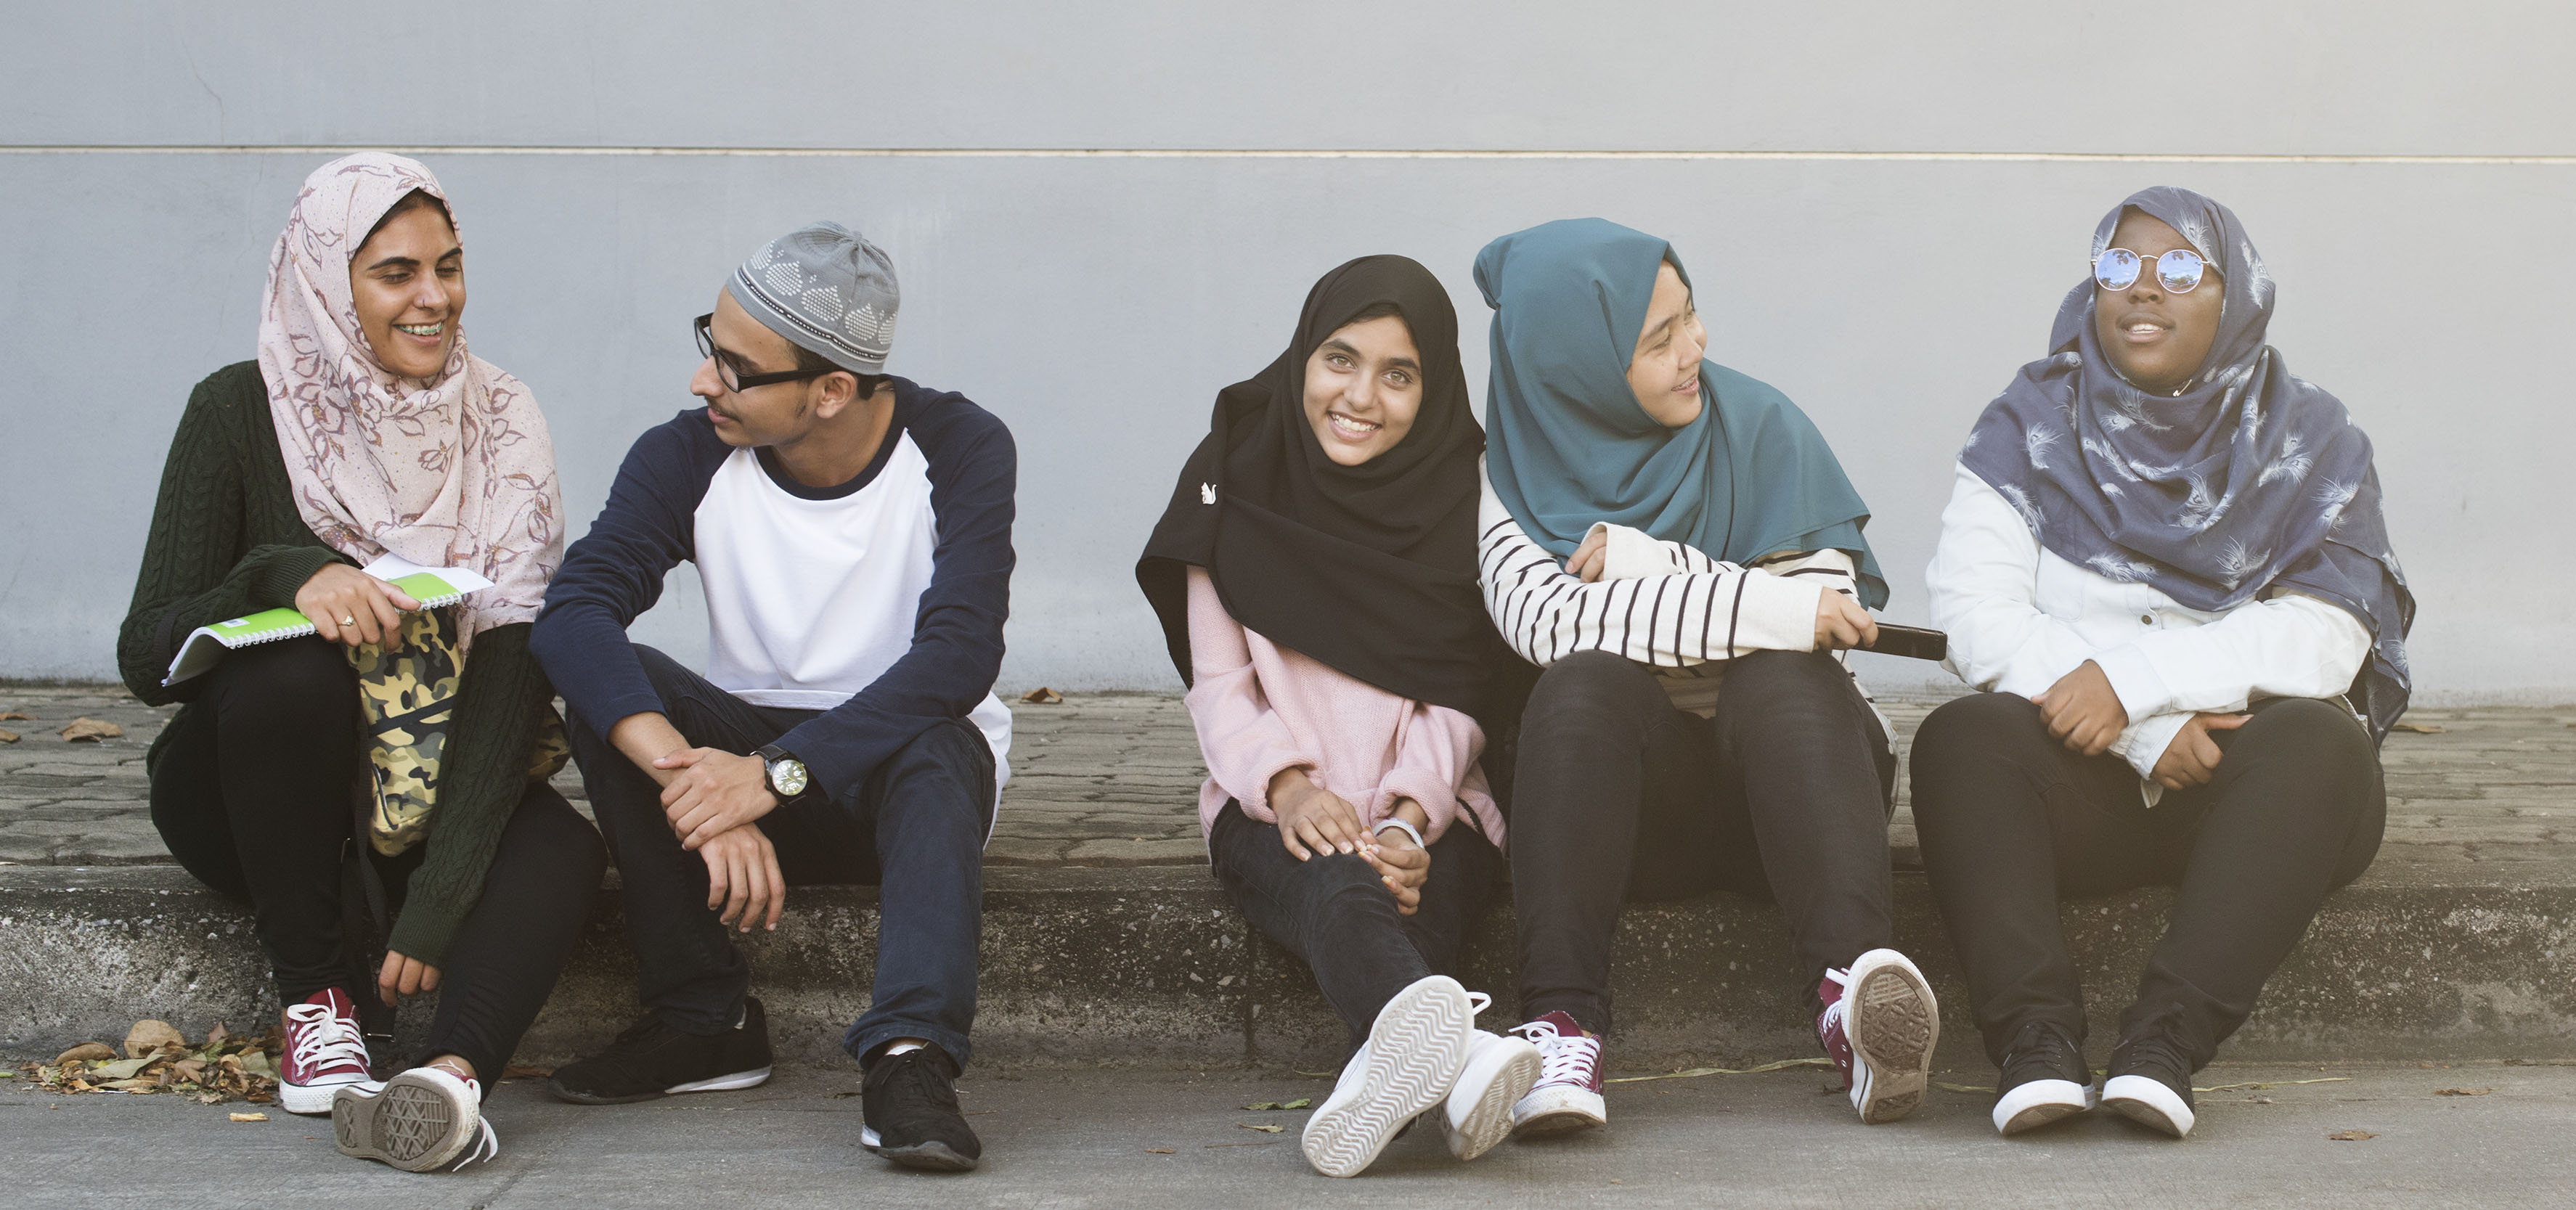 11 Ways to Build modesty in Young Muslims | SoundVision.com